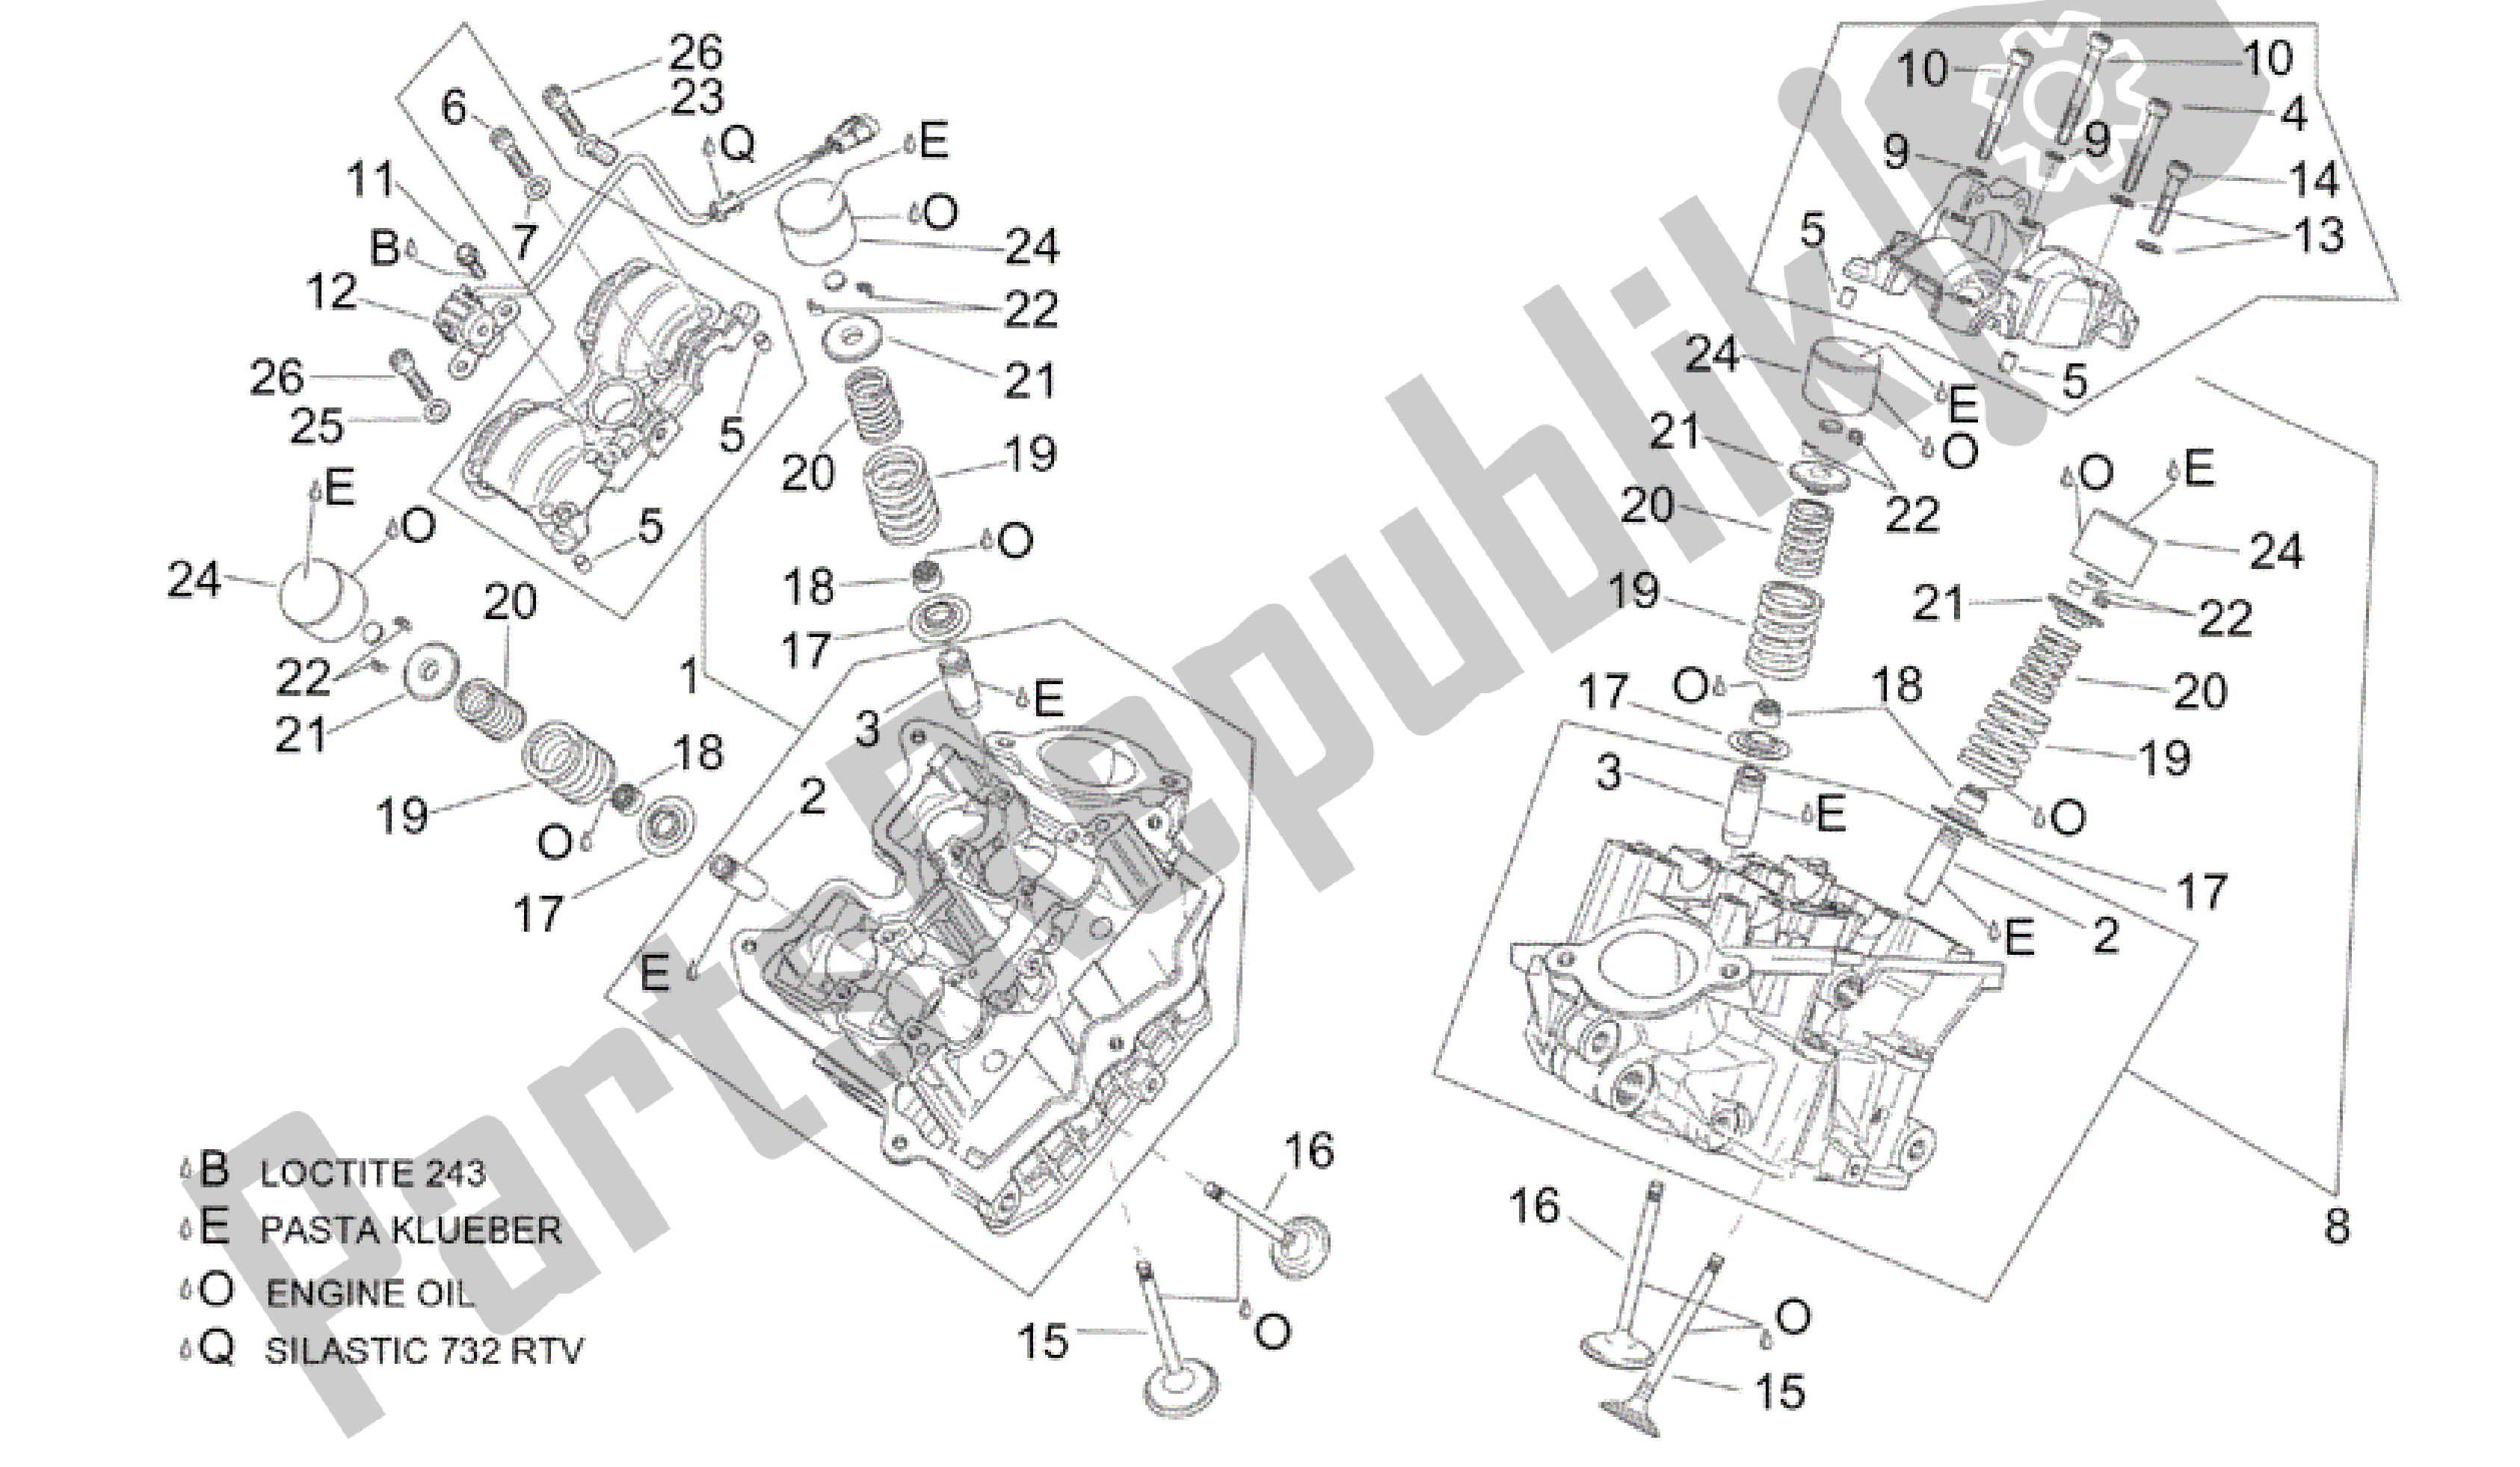 All parts for the Cylinder Head And Valves of the Aprilia RSV Tuono R 3952 1000 2002 - 2003